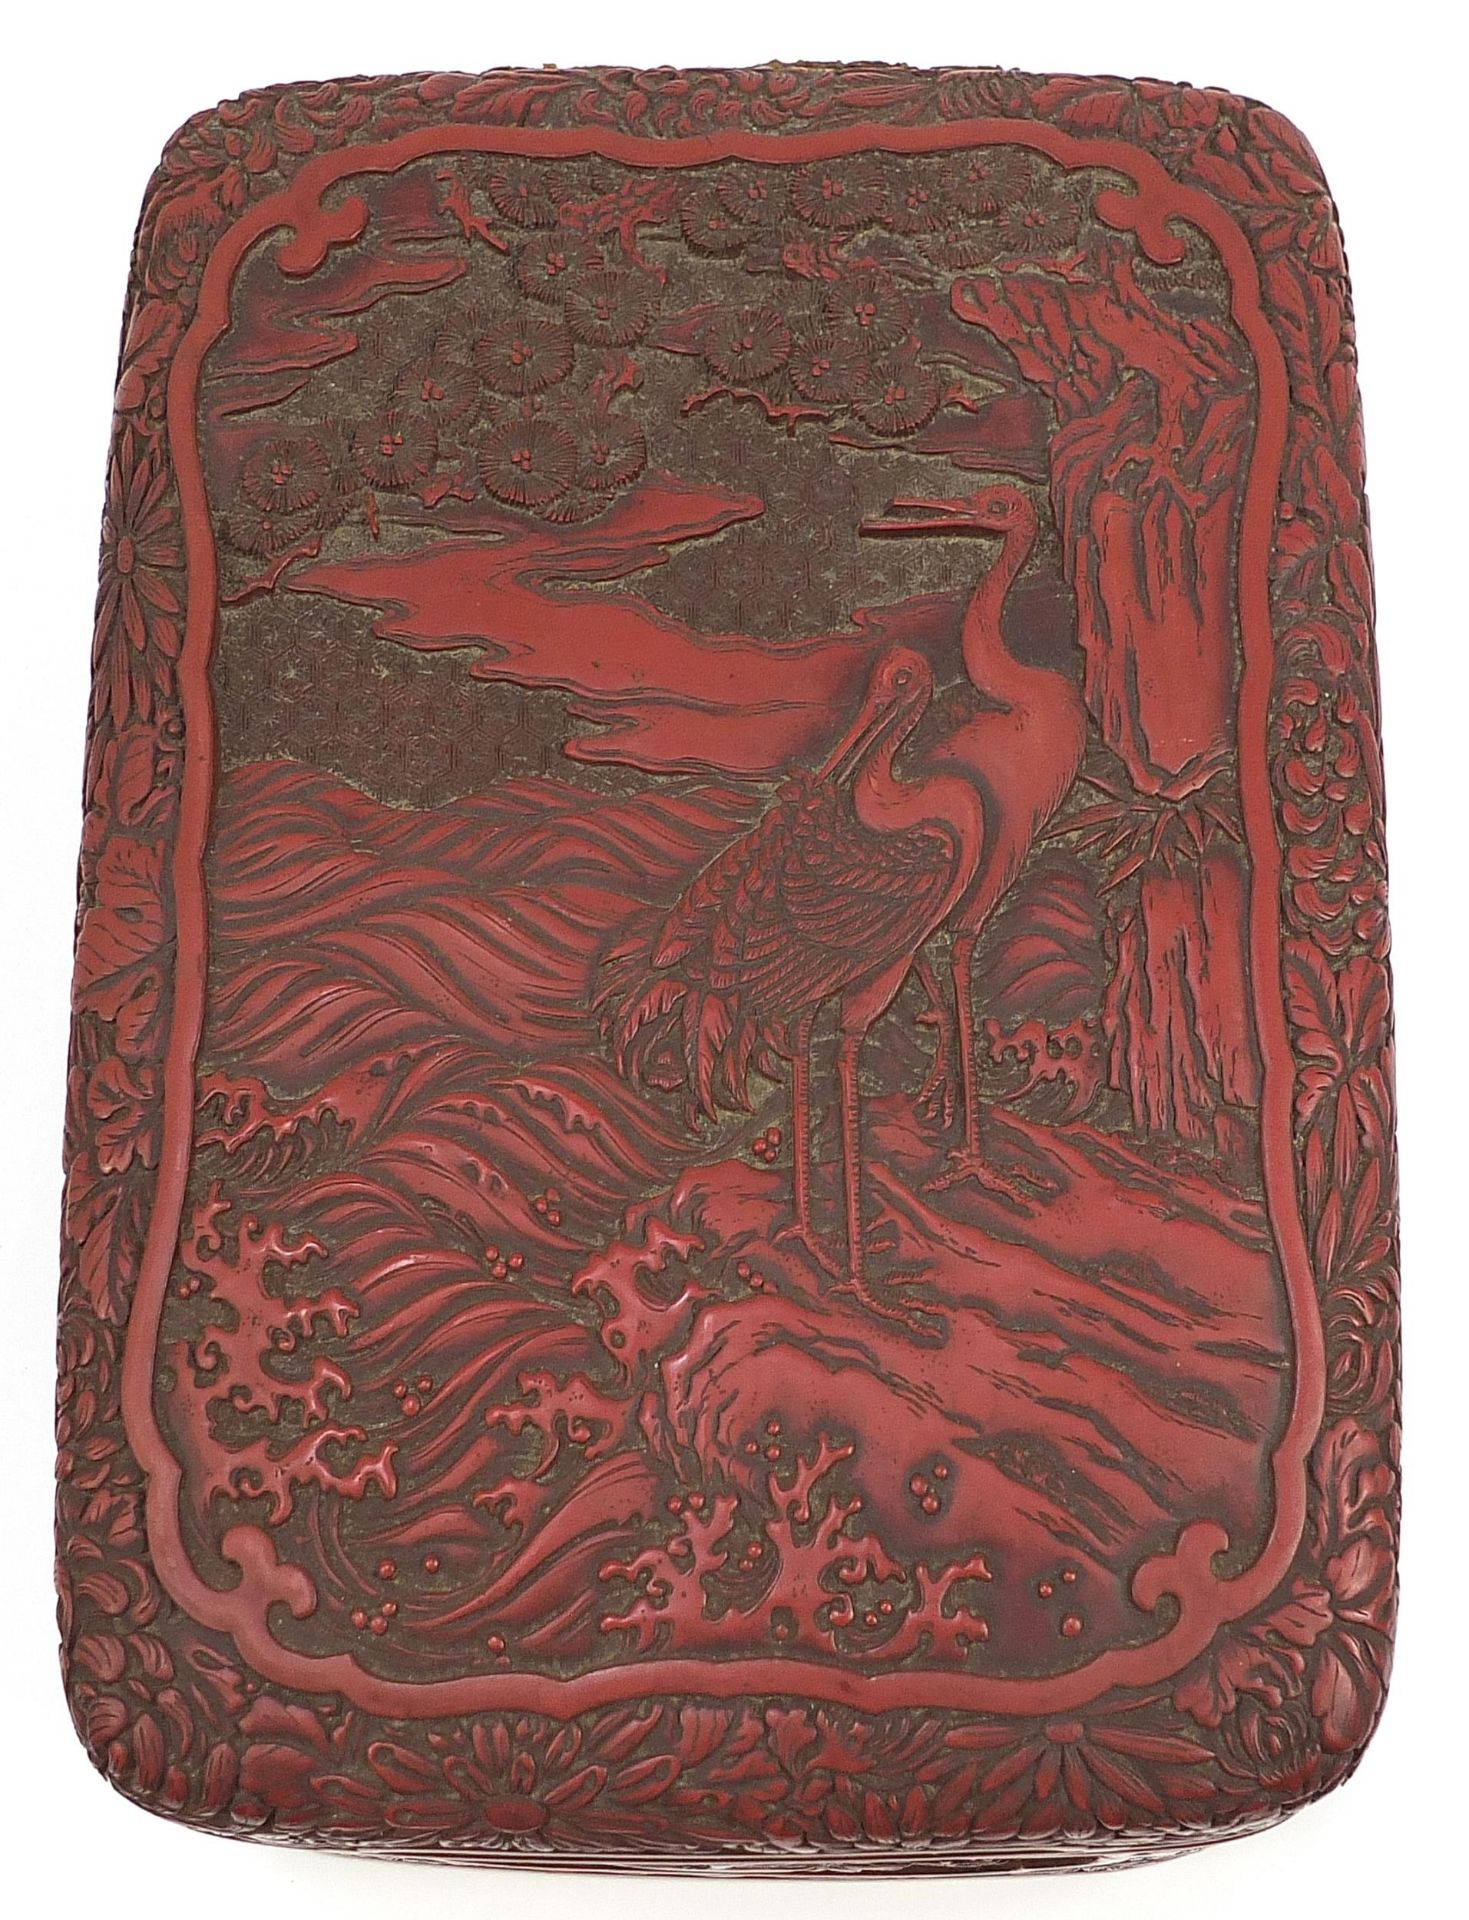 Large Chinese cinnabar lacquer box and cover carved with cranes in a landscape, 12cm H x 27.5cm W - Image 3 of 4